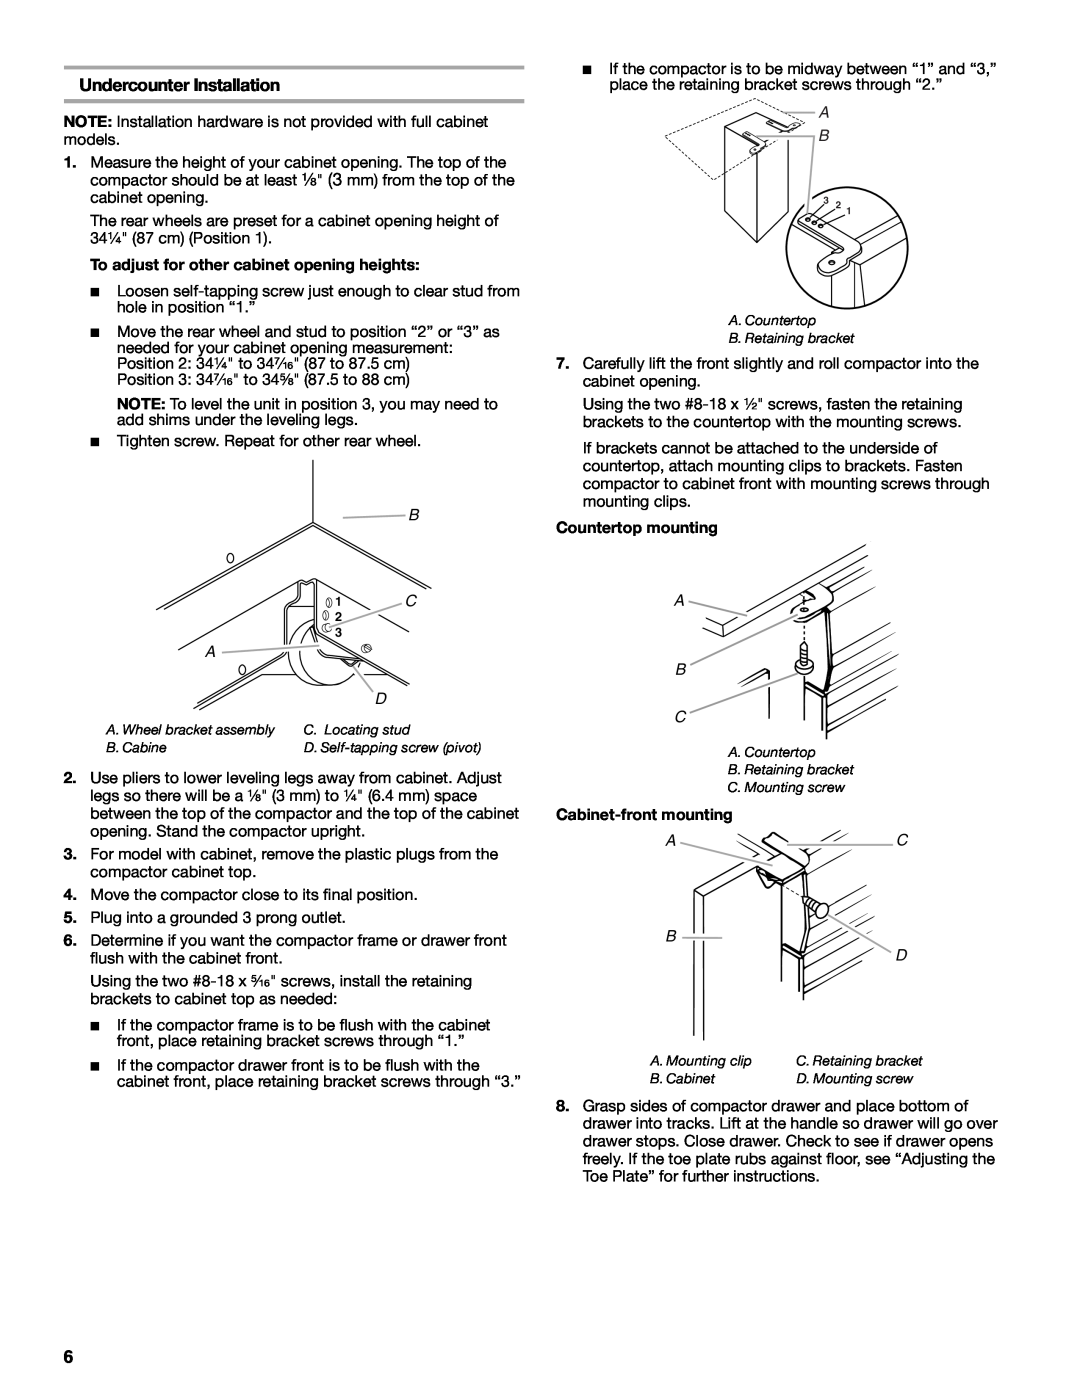 KitchenAid 9871915A Undercounter Installation, To adjust for other cabinet opening heights, Countertop mounting, A B C 